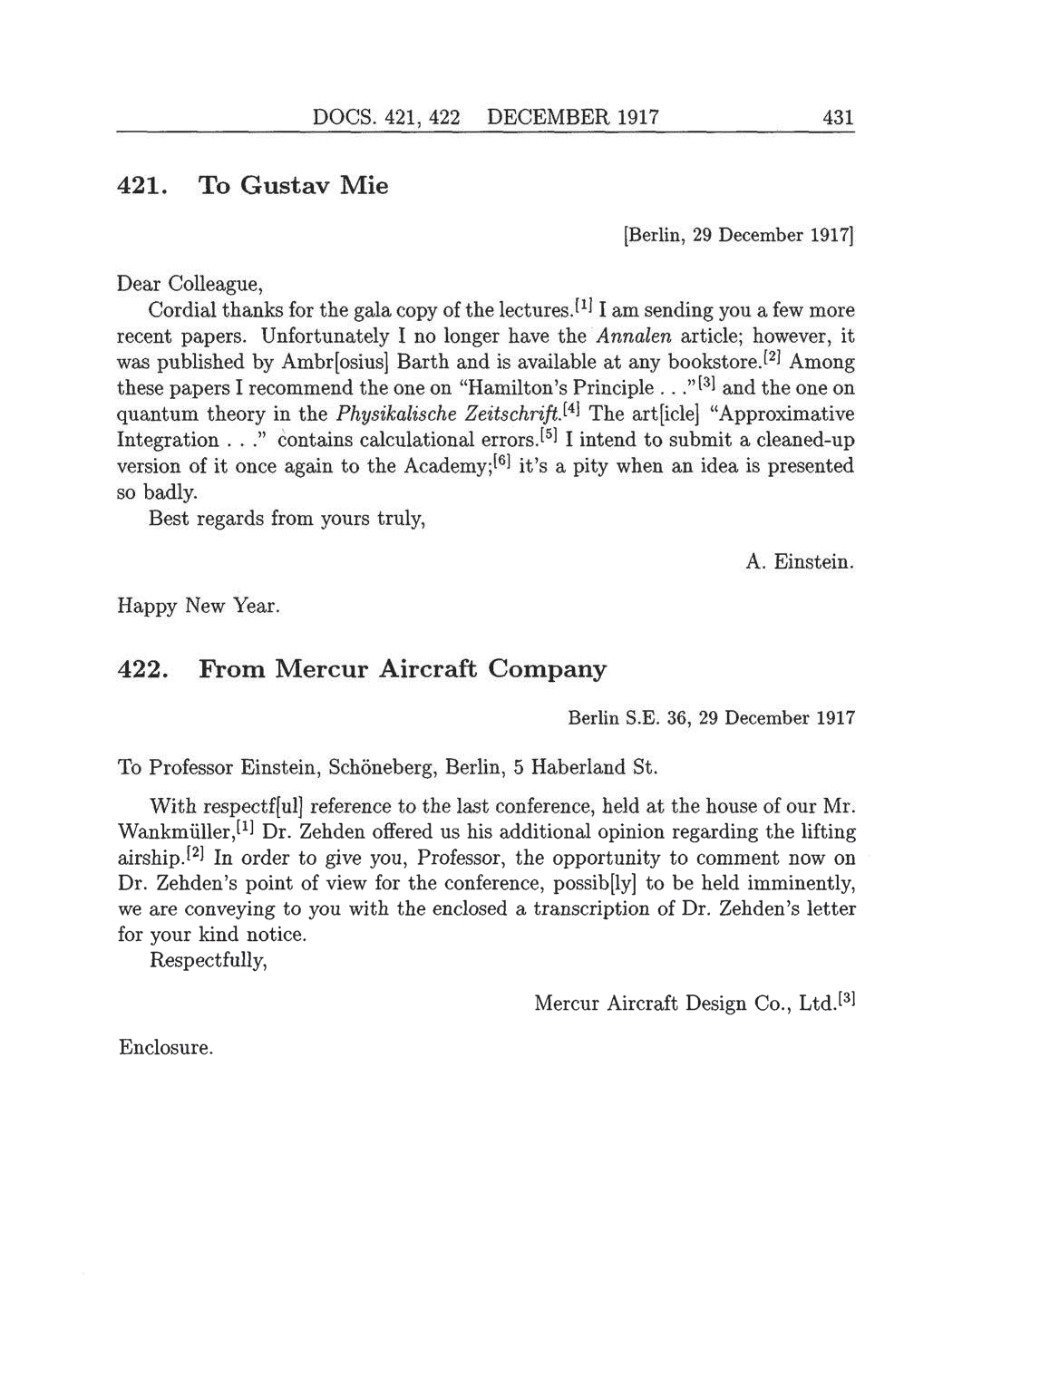 Volume 8: The Berlin Years: Correspondence, 1914-1918 (English translation supplement) page 431